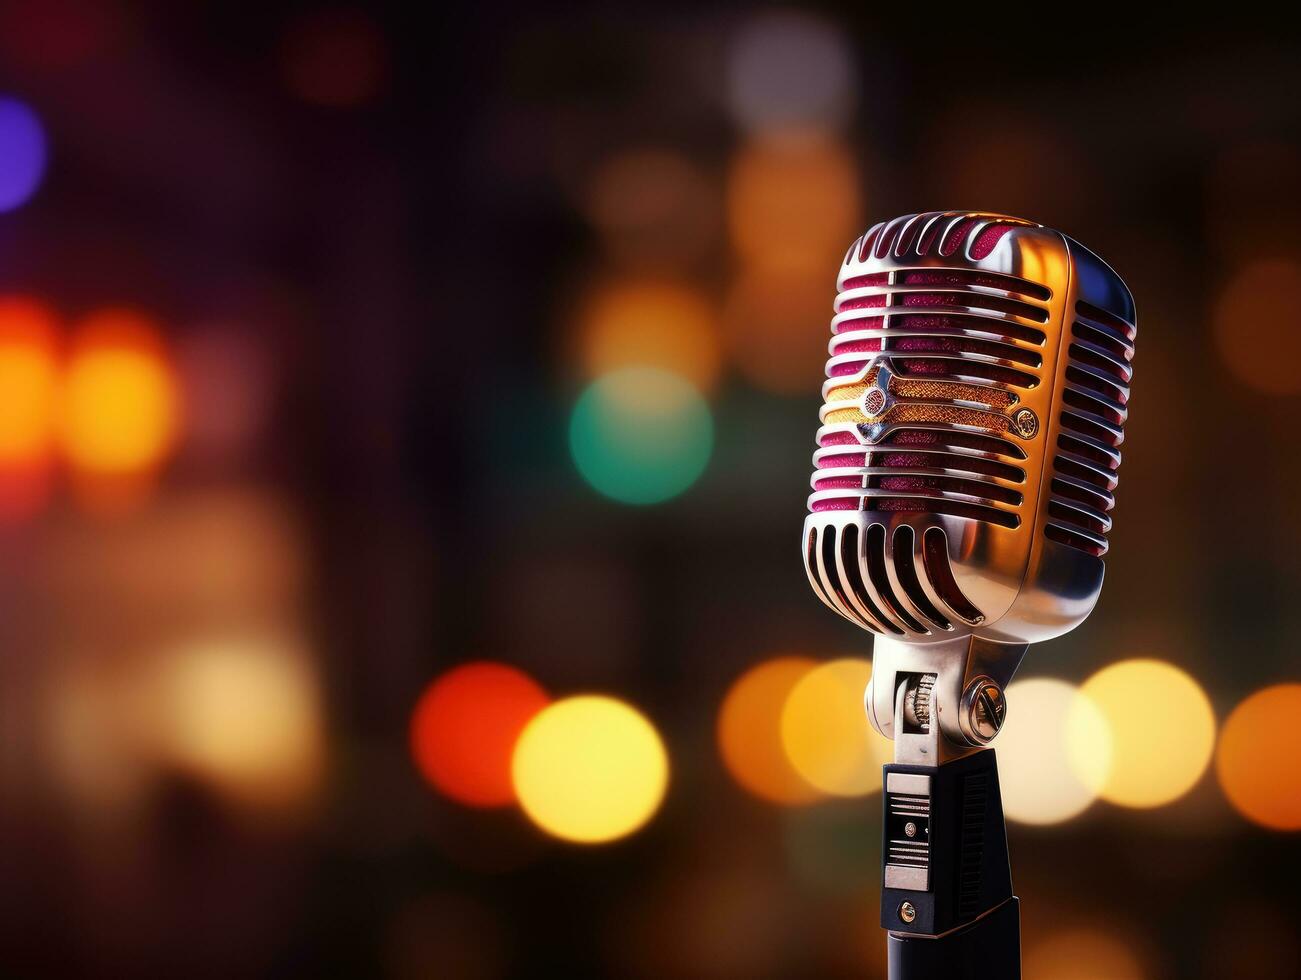 Retro styled image of a vintage microphone on a bokeh lights background photo